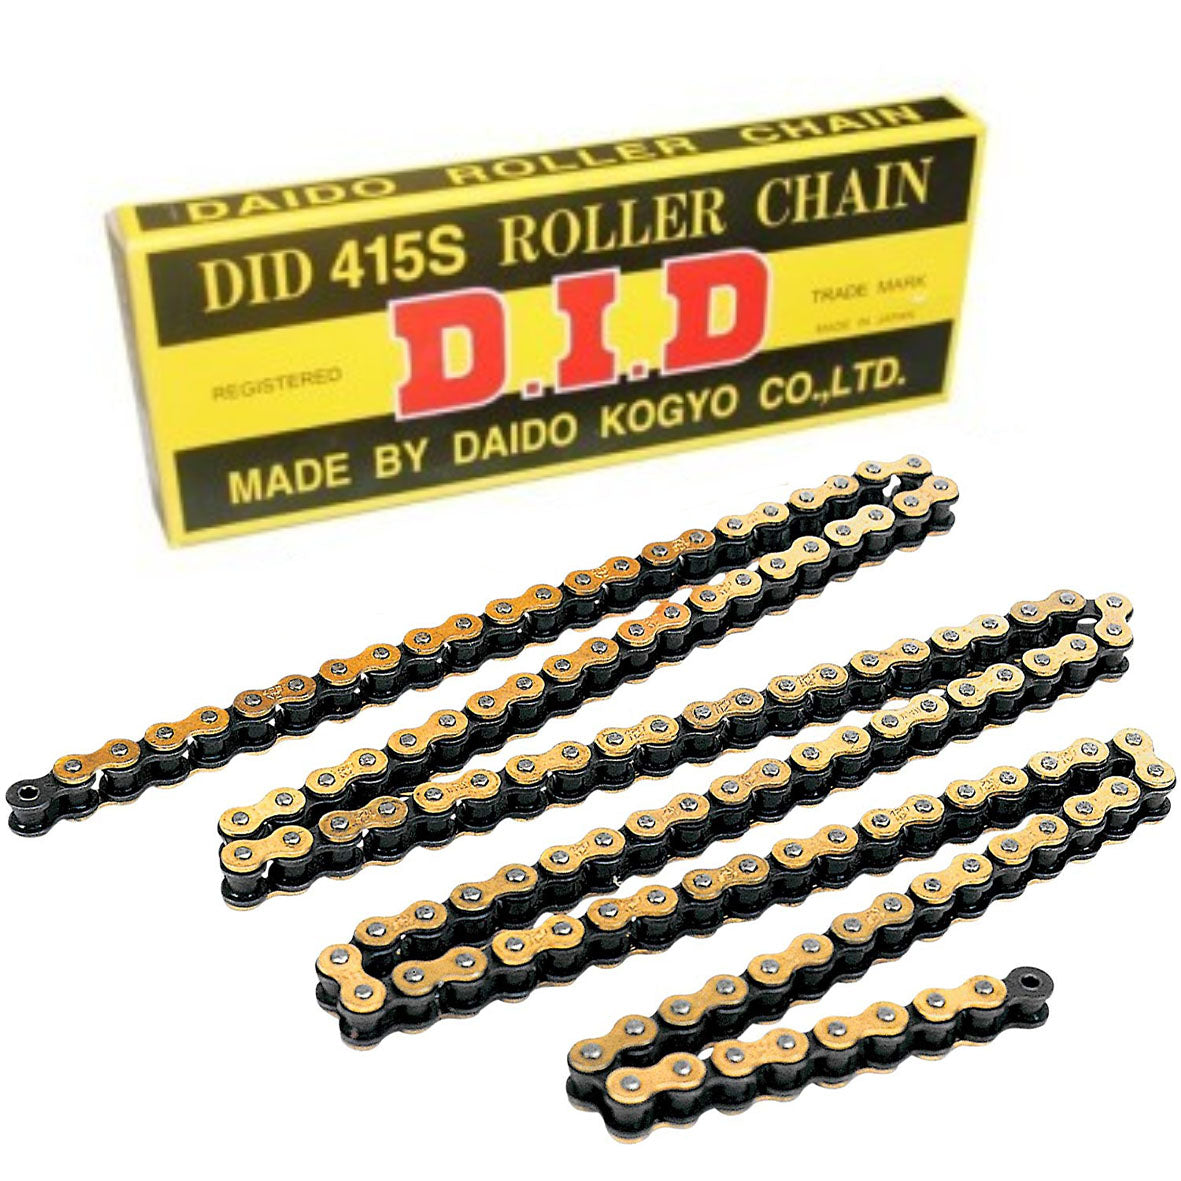 DID 415S 132 Link Standard Chain (Gold/Black)